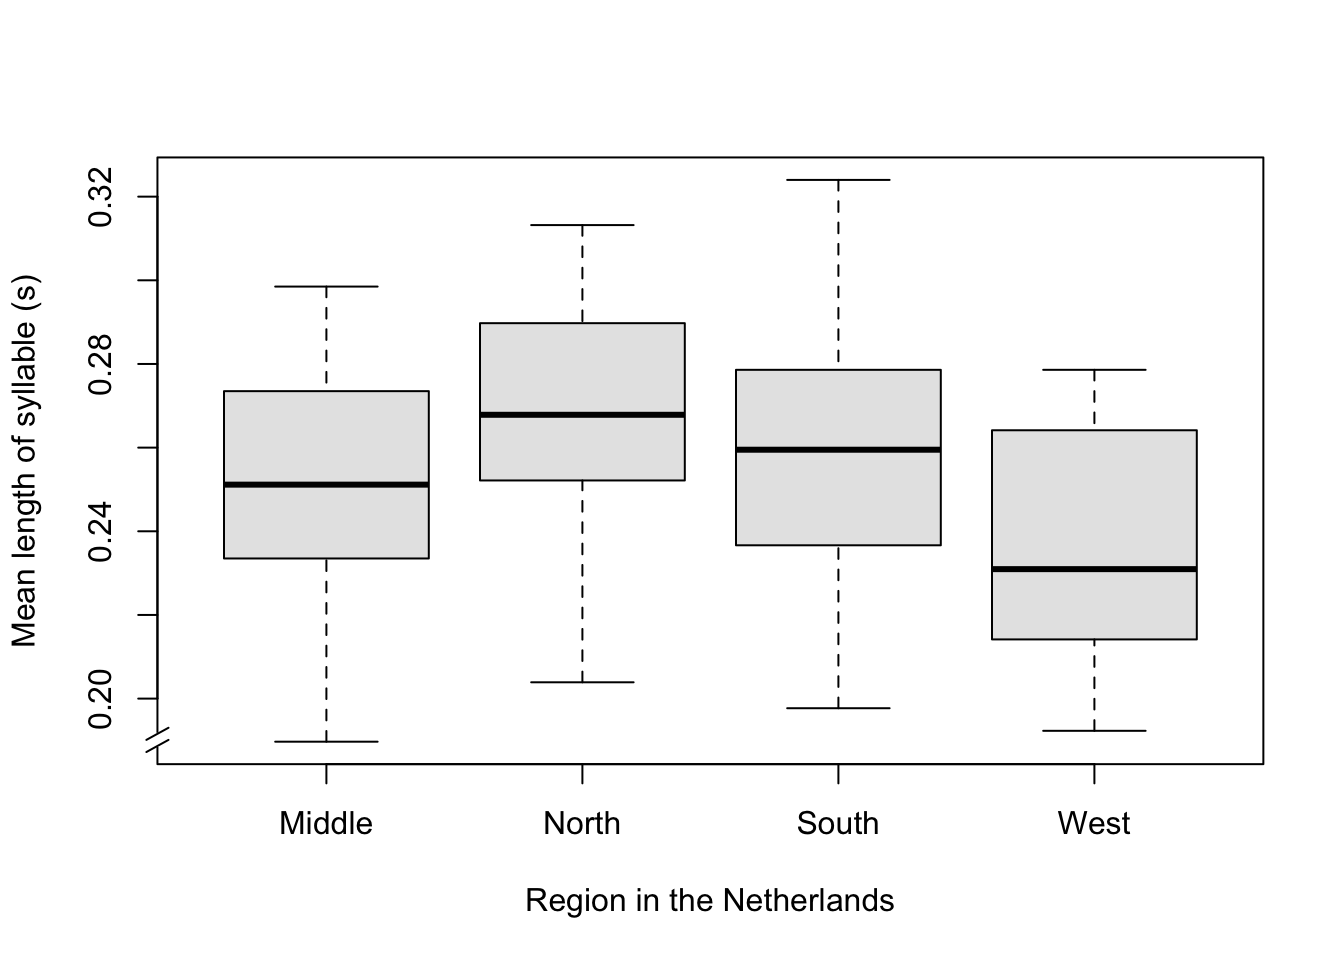 Boxplot of the mean length of syllable, split up according to region of origin of the speaker.